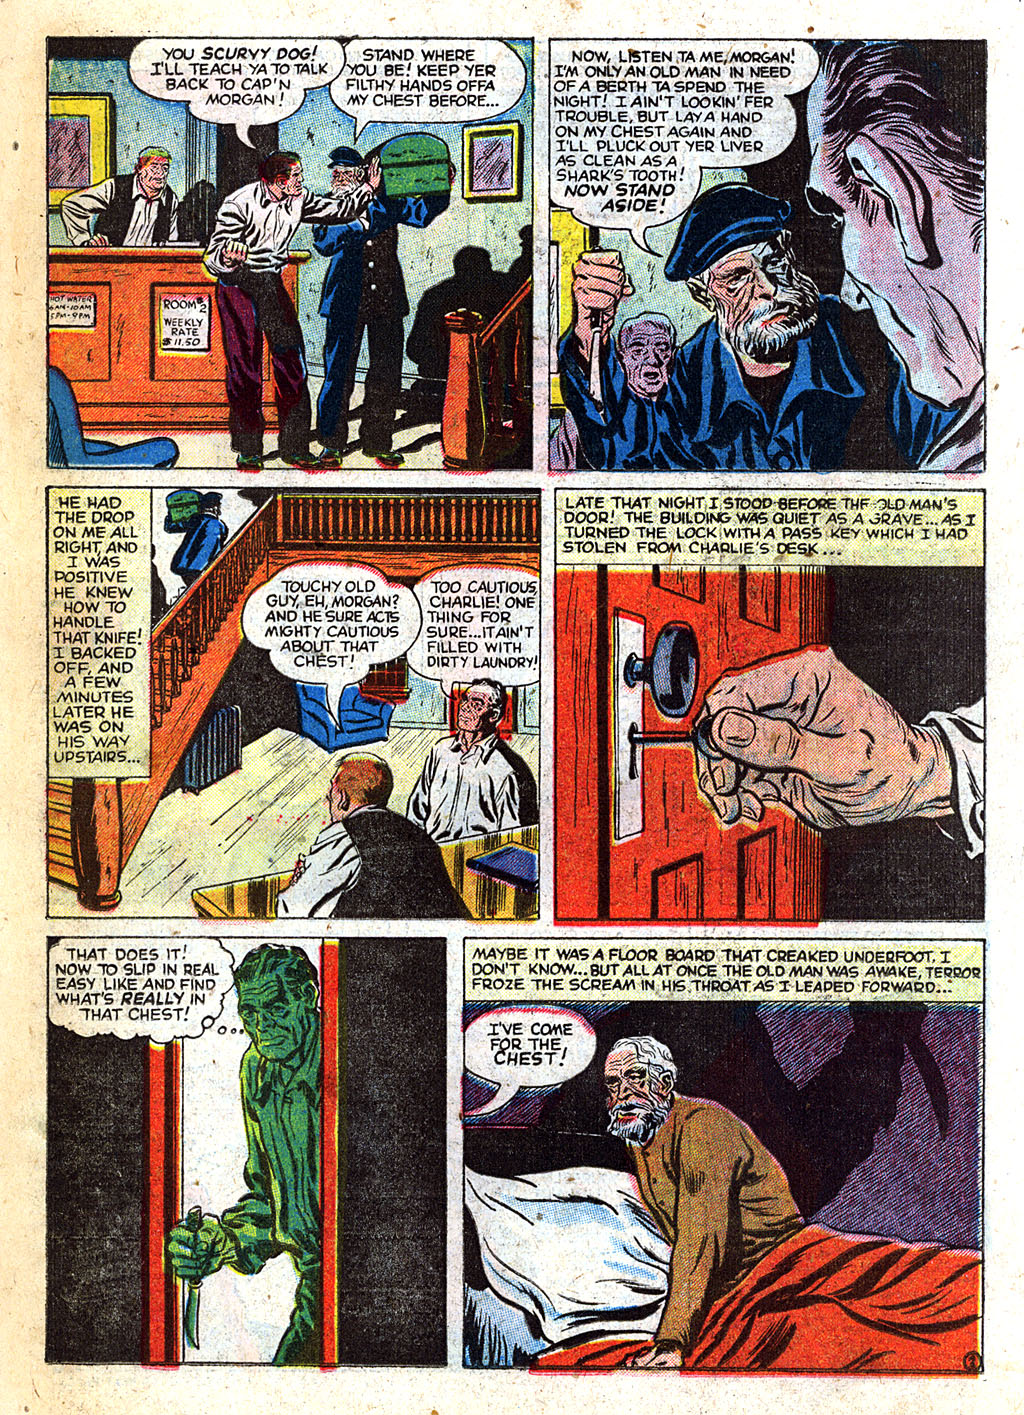 Marvel Tales (1949) 104 Page 22